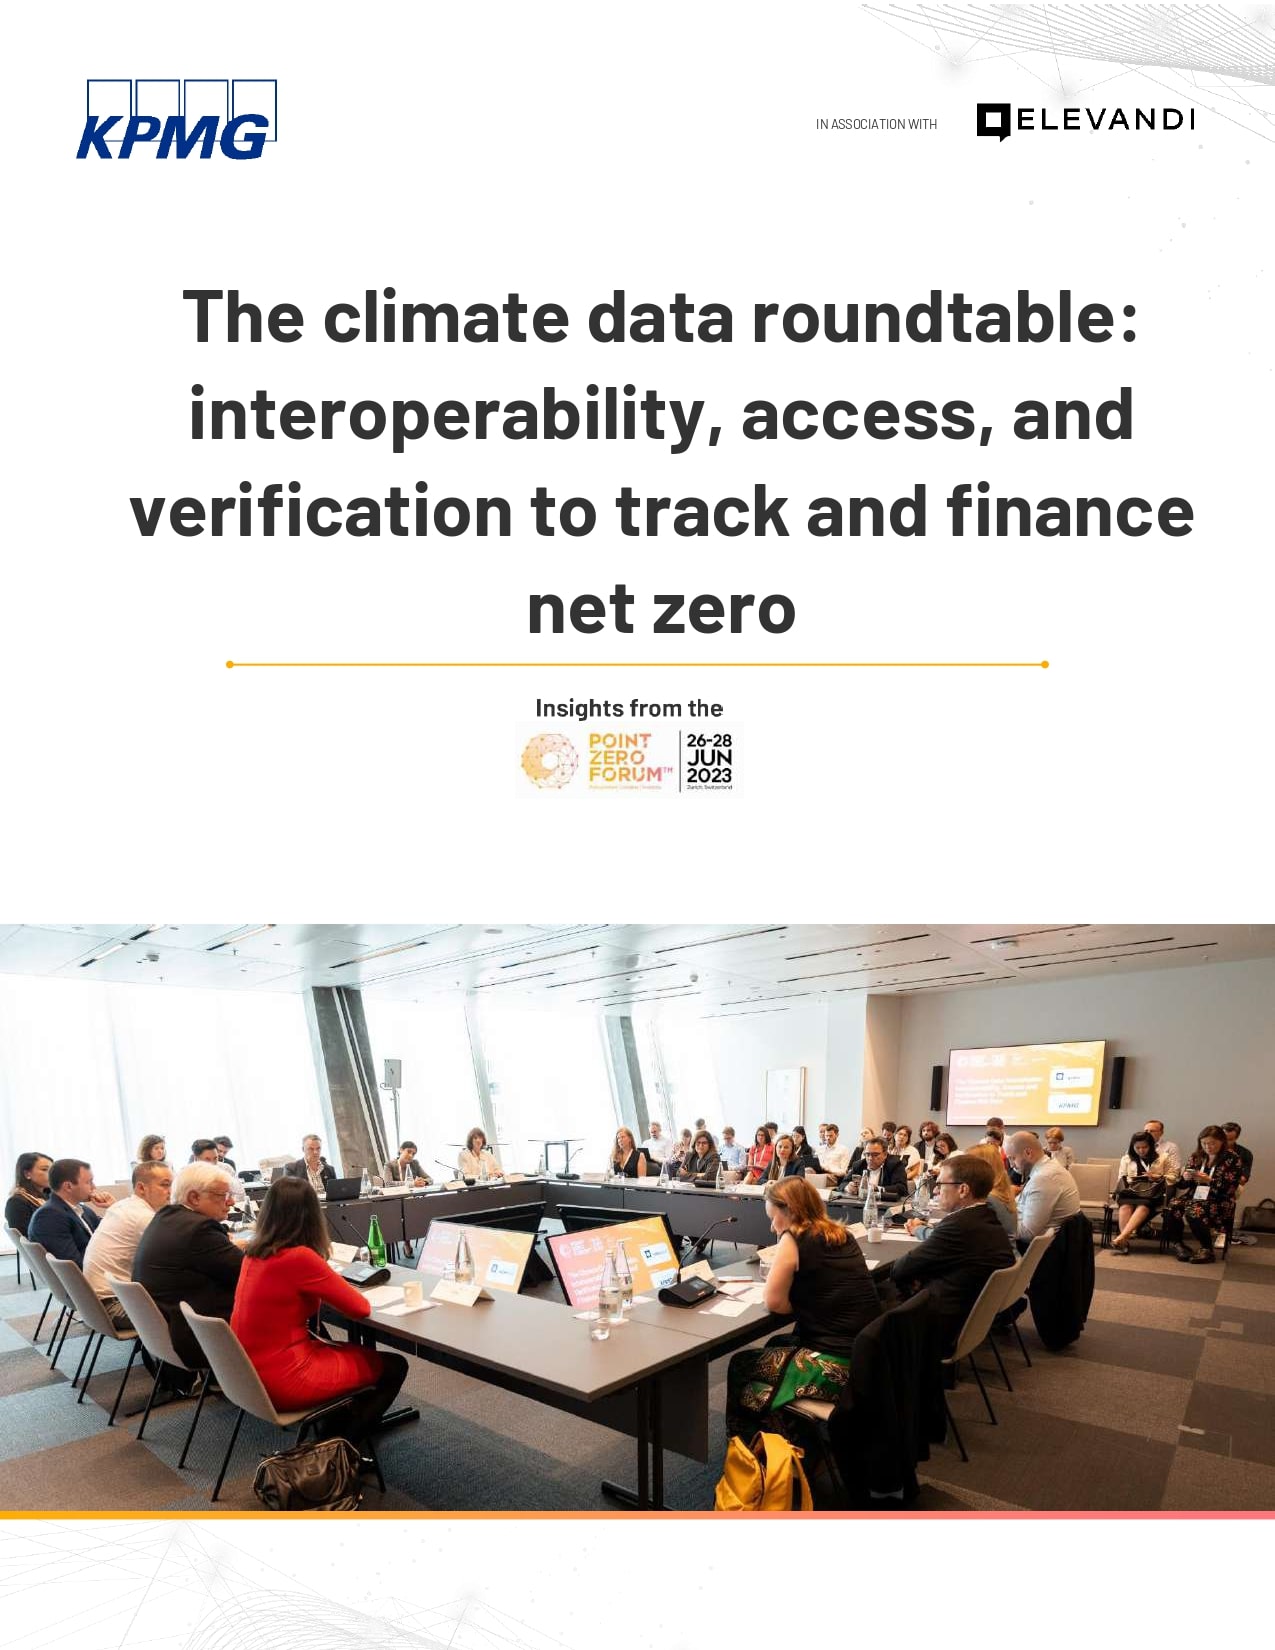 The-Climate-Data-Roundtable-KPMG-1